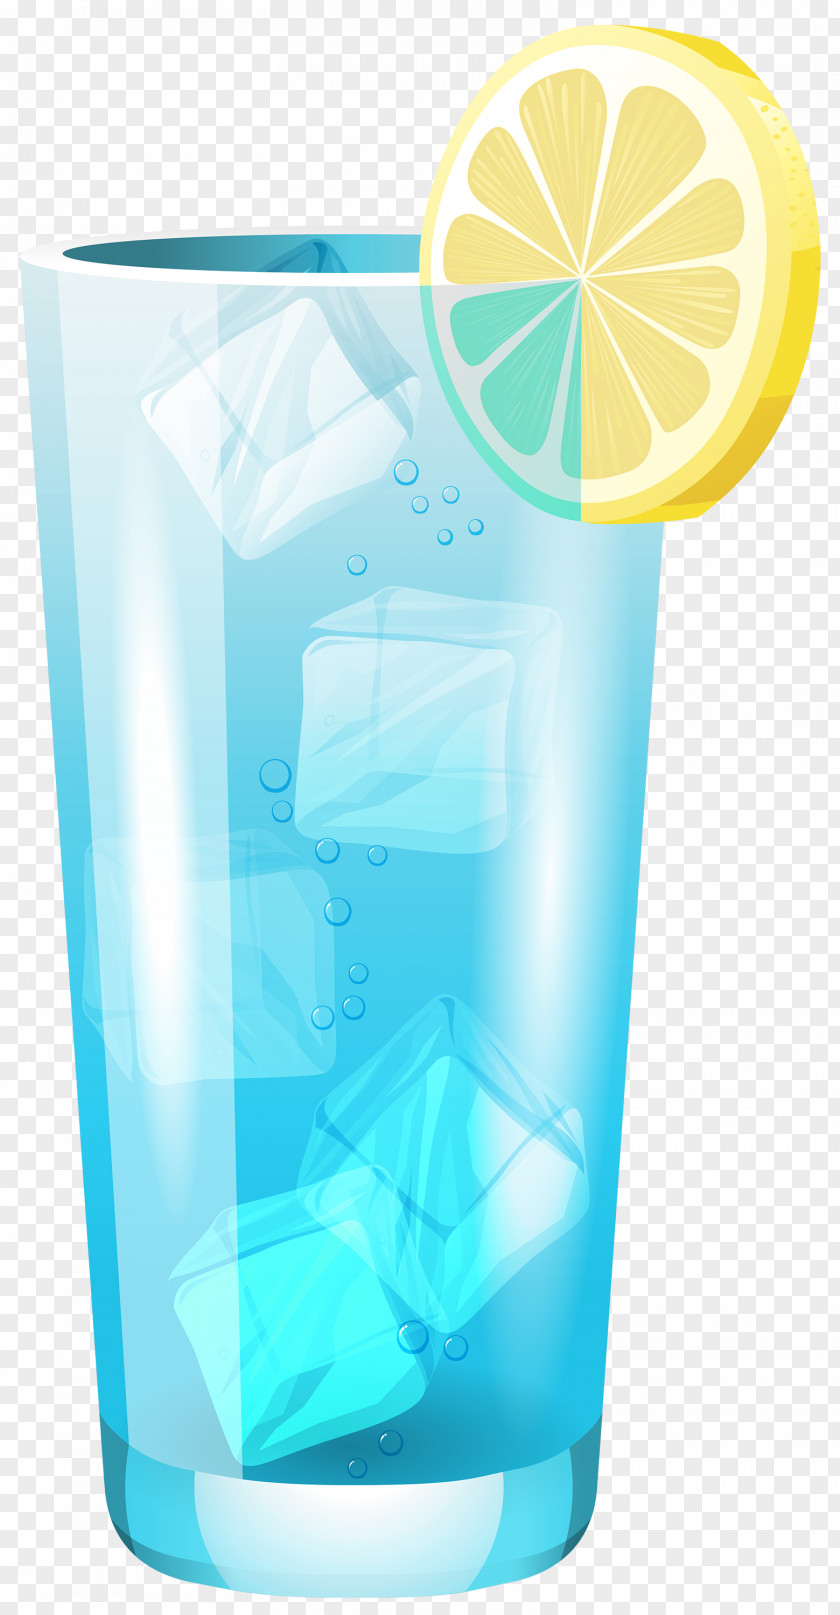 Coctail Blue Hawaii Lemonade Cocktail Glass Drink PNG